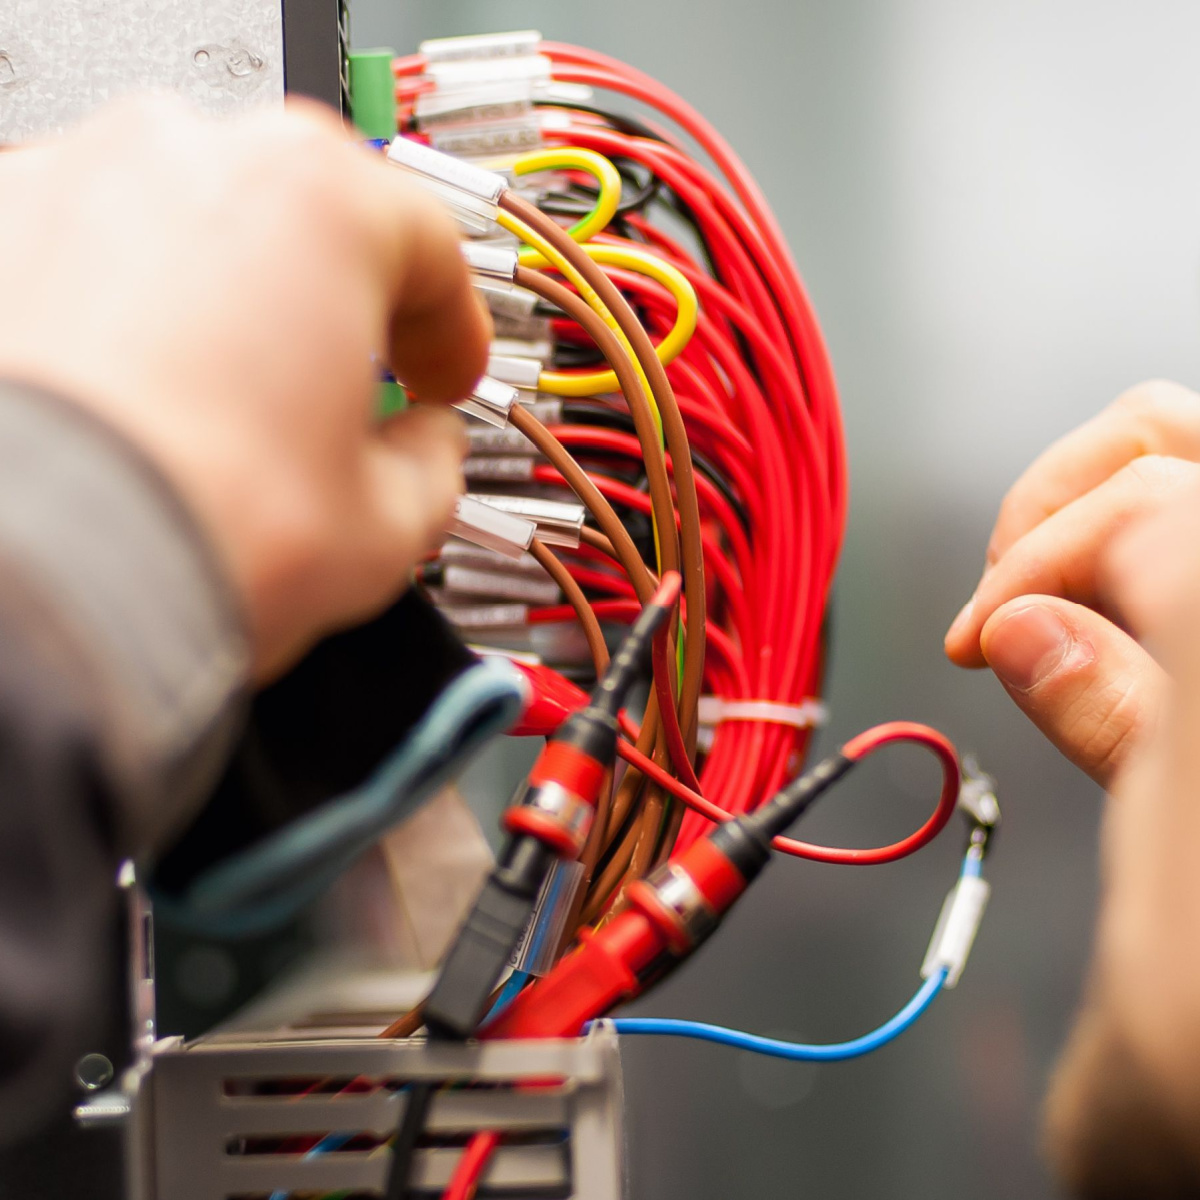 Why Every Sultan Homeowner Needs a Trusted Electrical Contractor on Hand